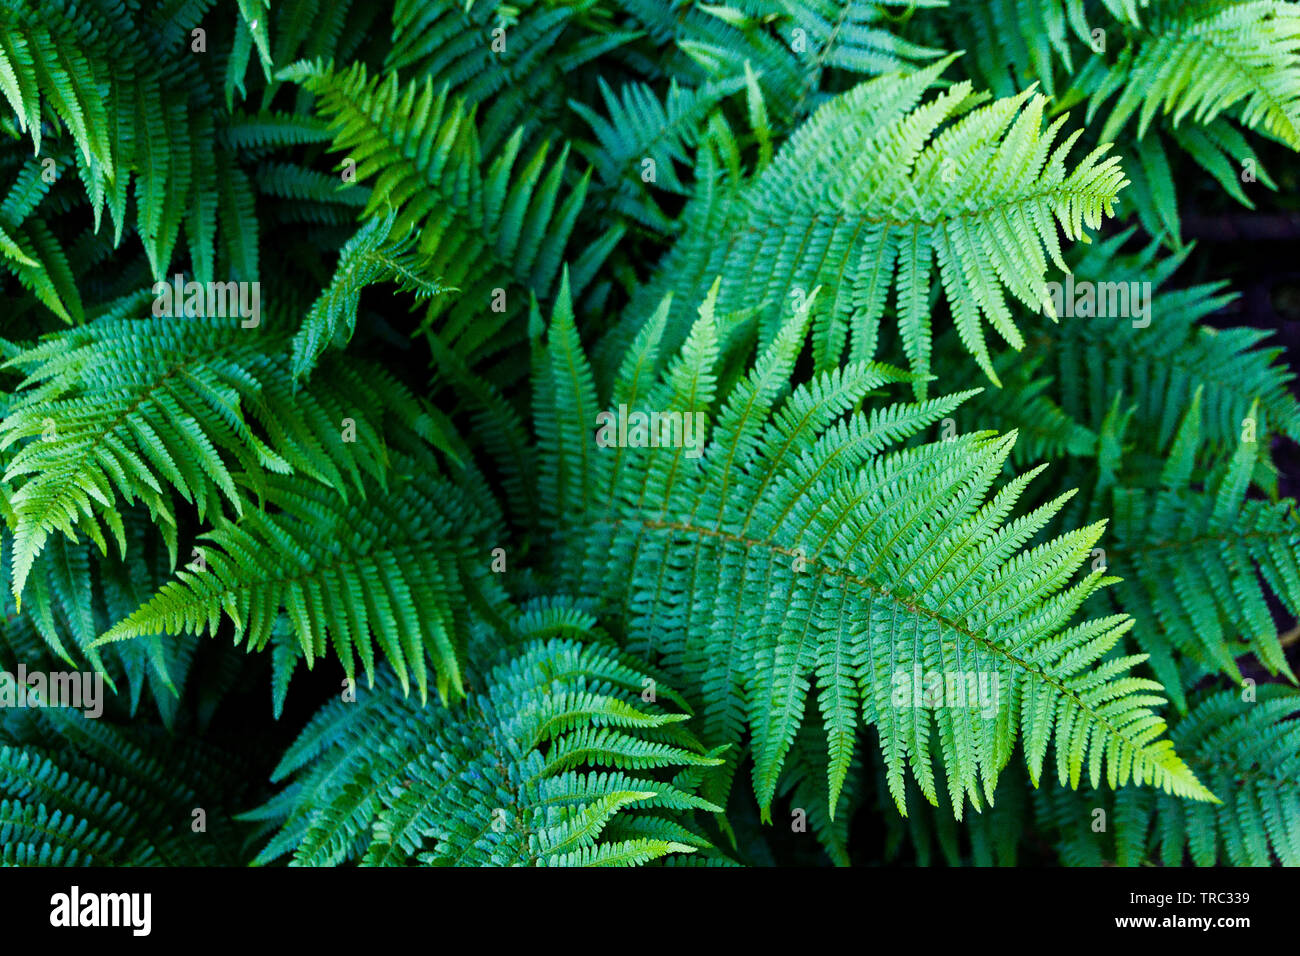 Fern (Polypodiopsida) with top view. Concept of ancient vascular plant that reproduces via spores Stock Photo